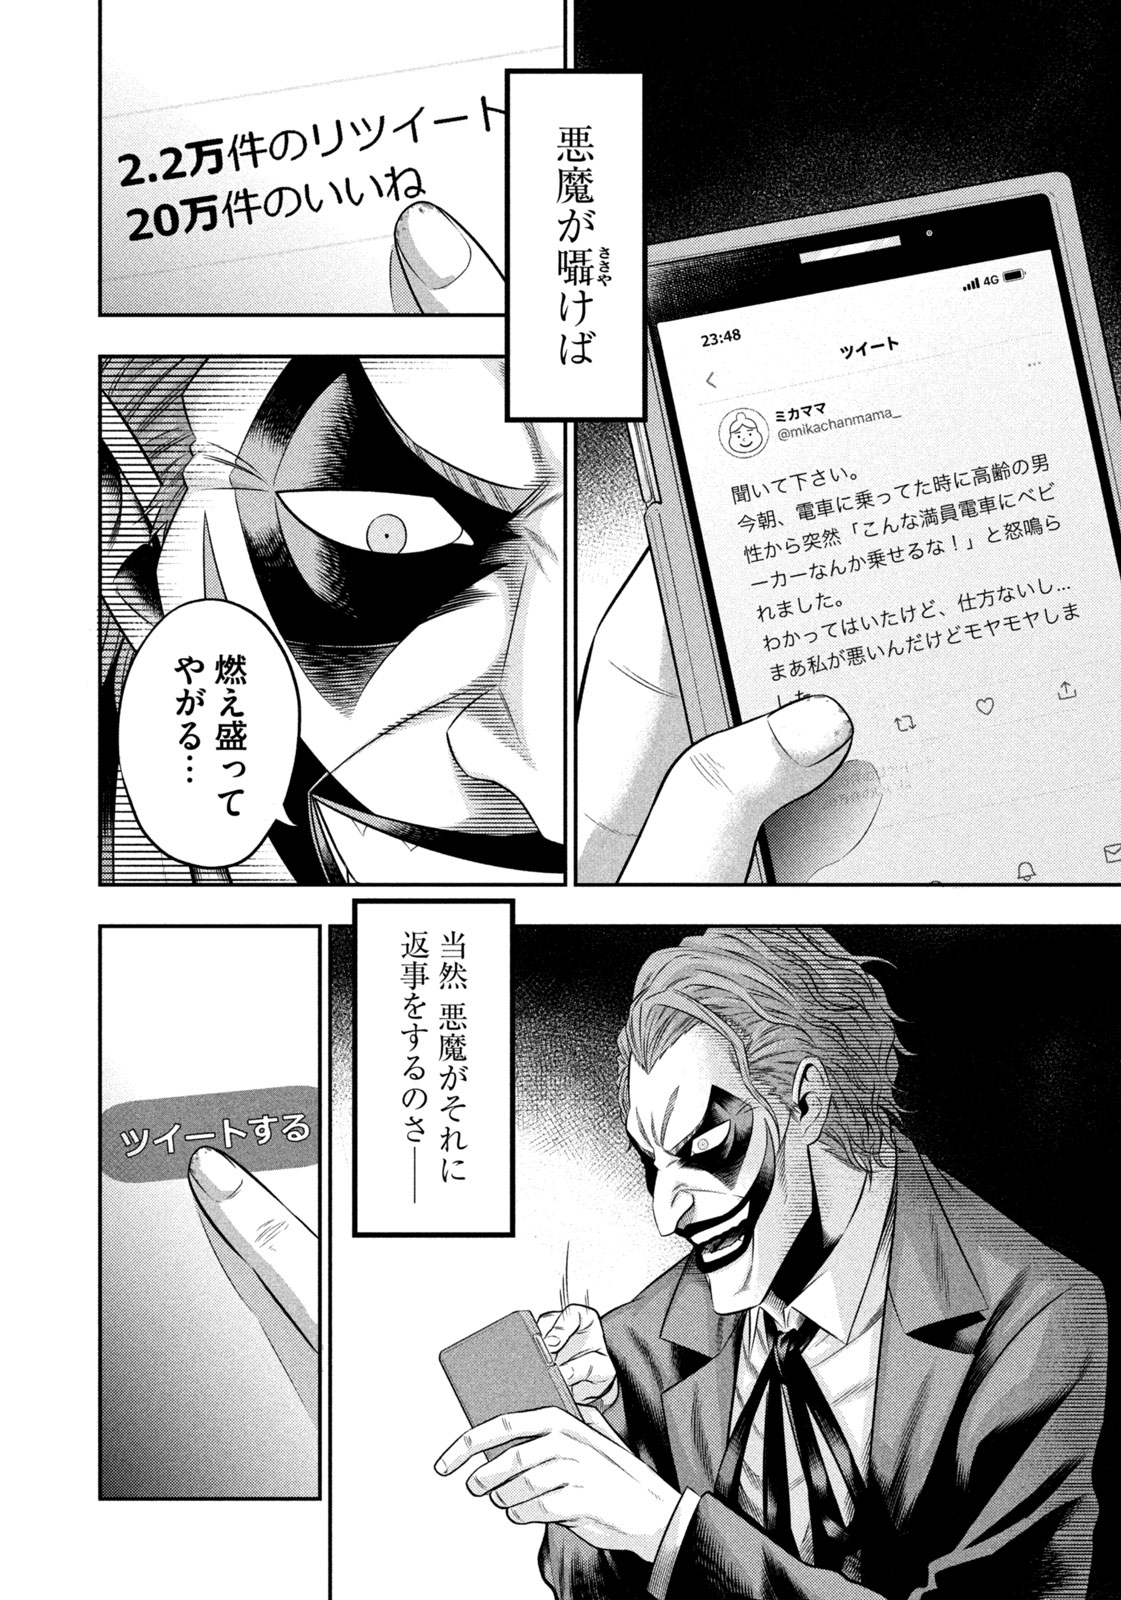 One Operation Joker - Chapter 81 - Page 2